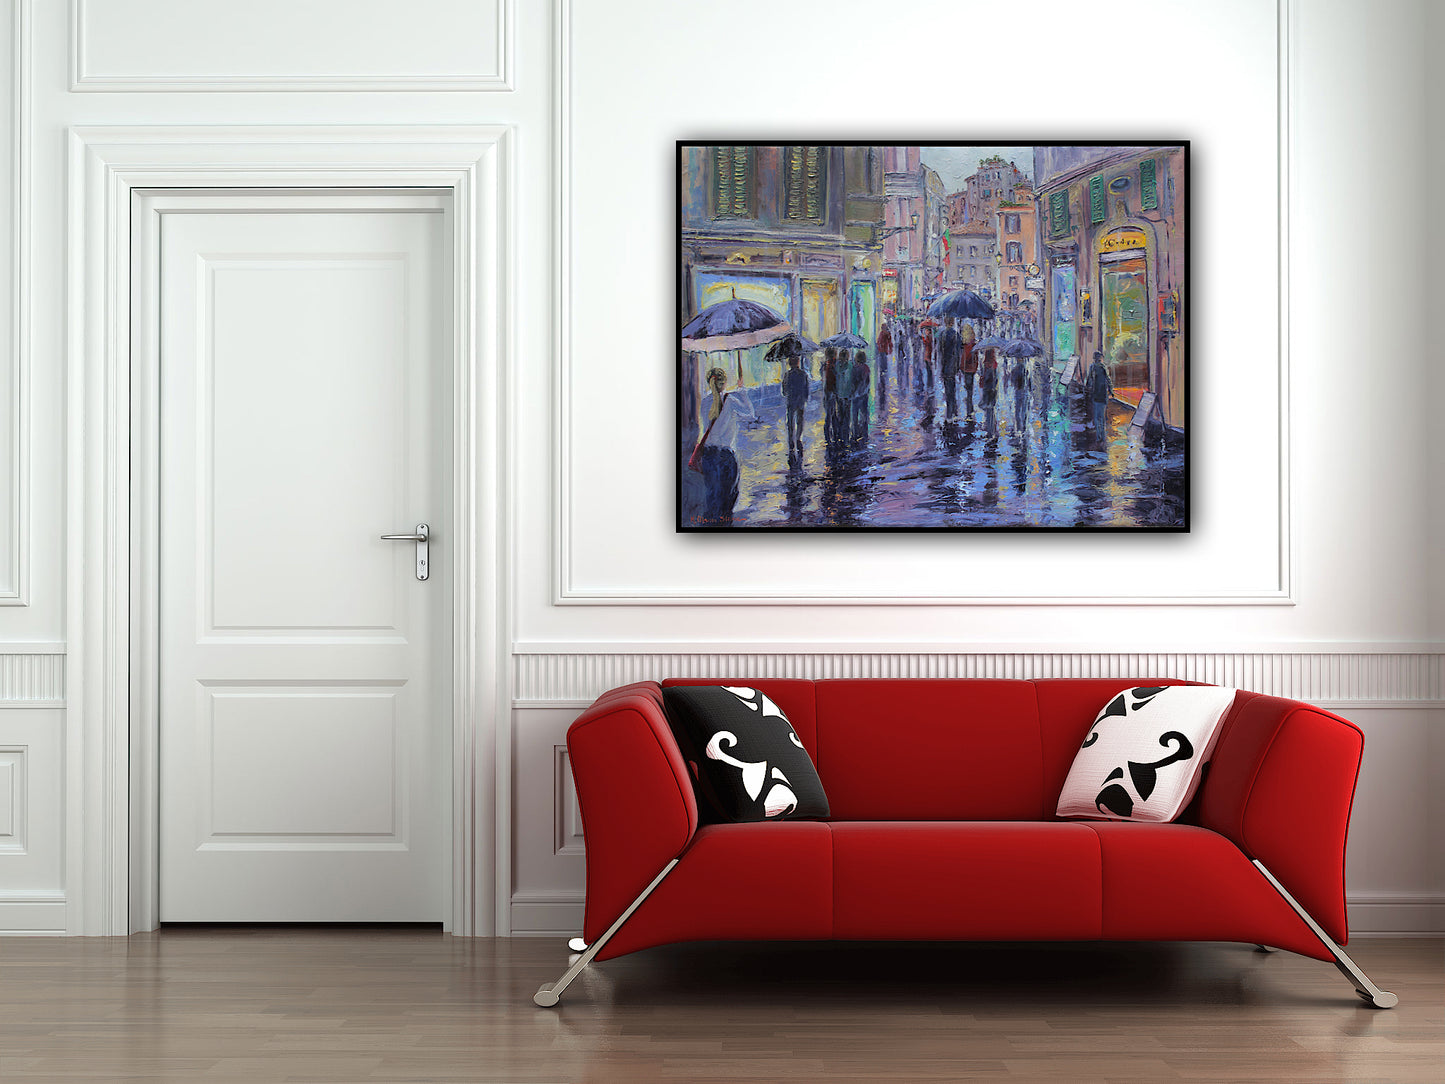 A Rainy Evening Stroll In Rome, Original 30" x 40" European Cityscape Oil Painting On Canvas